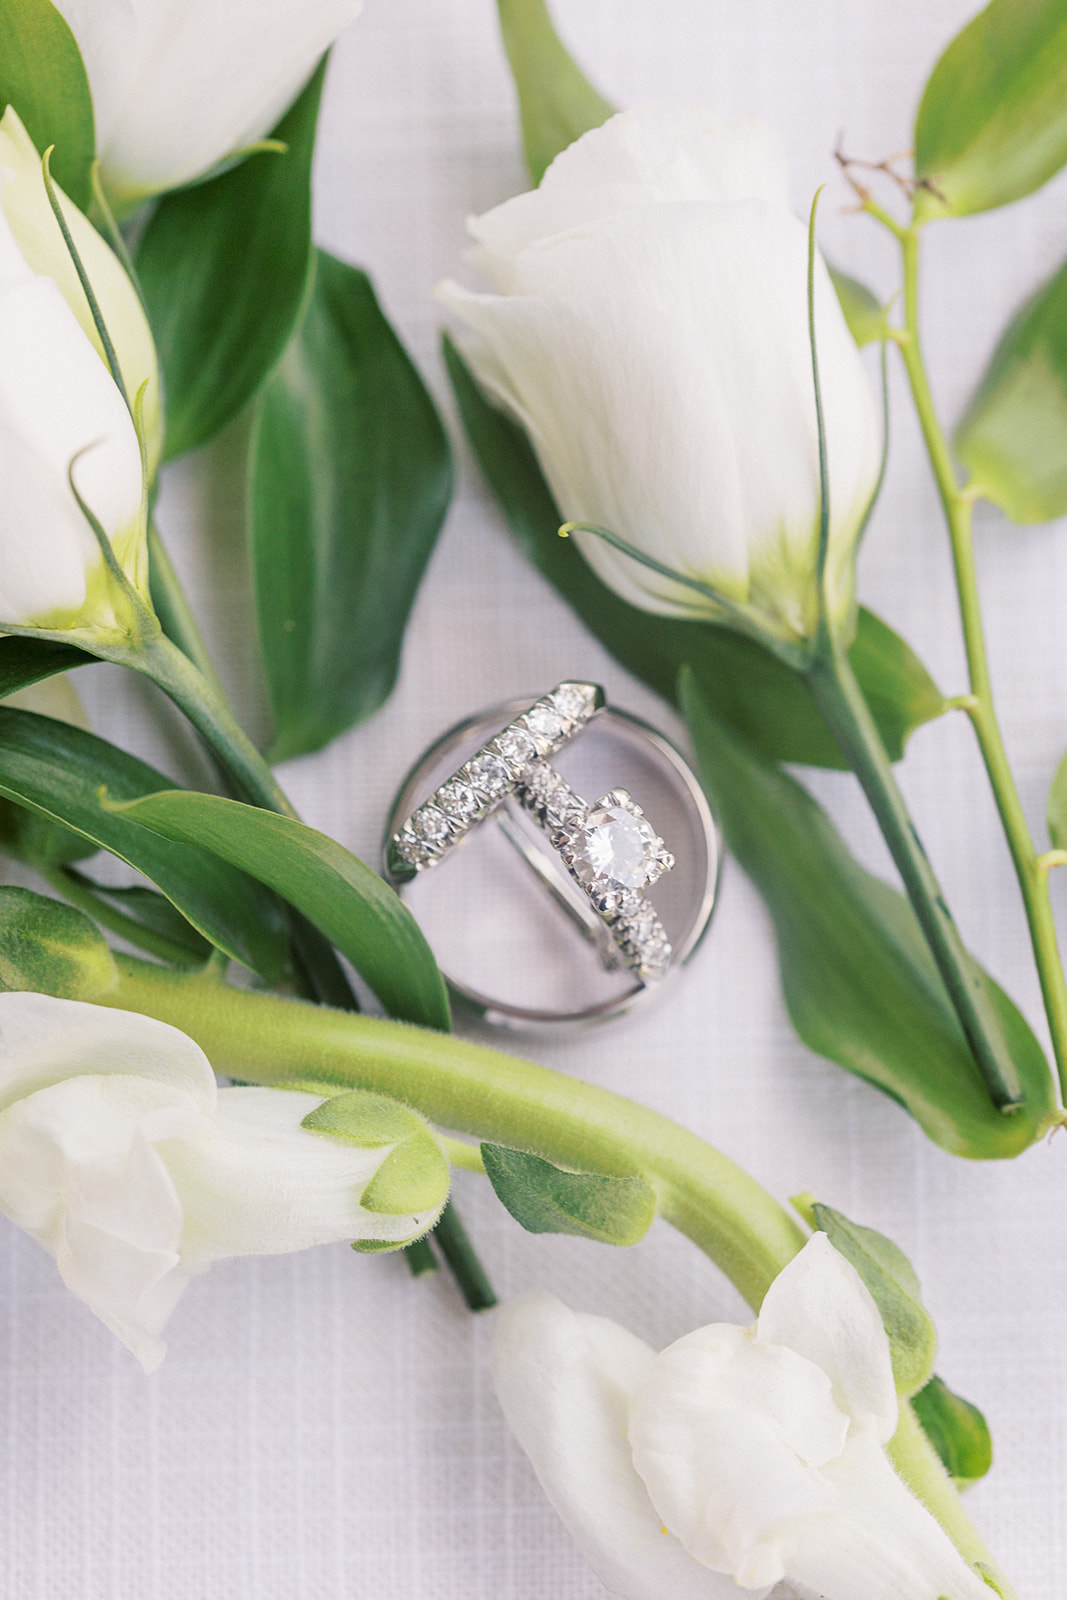 Details of wedding rings standing together with white flowers